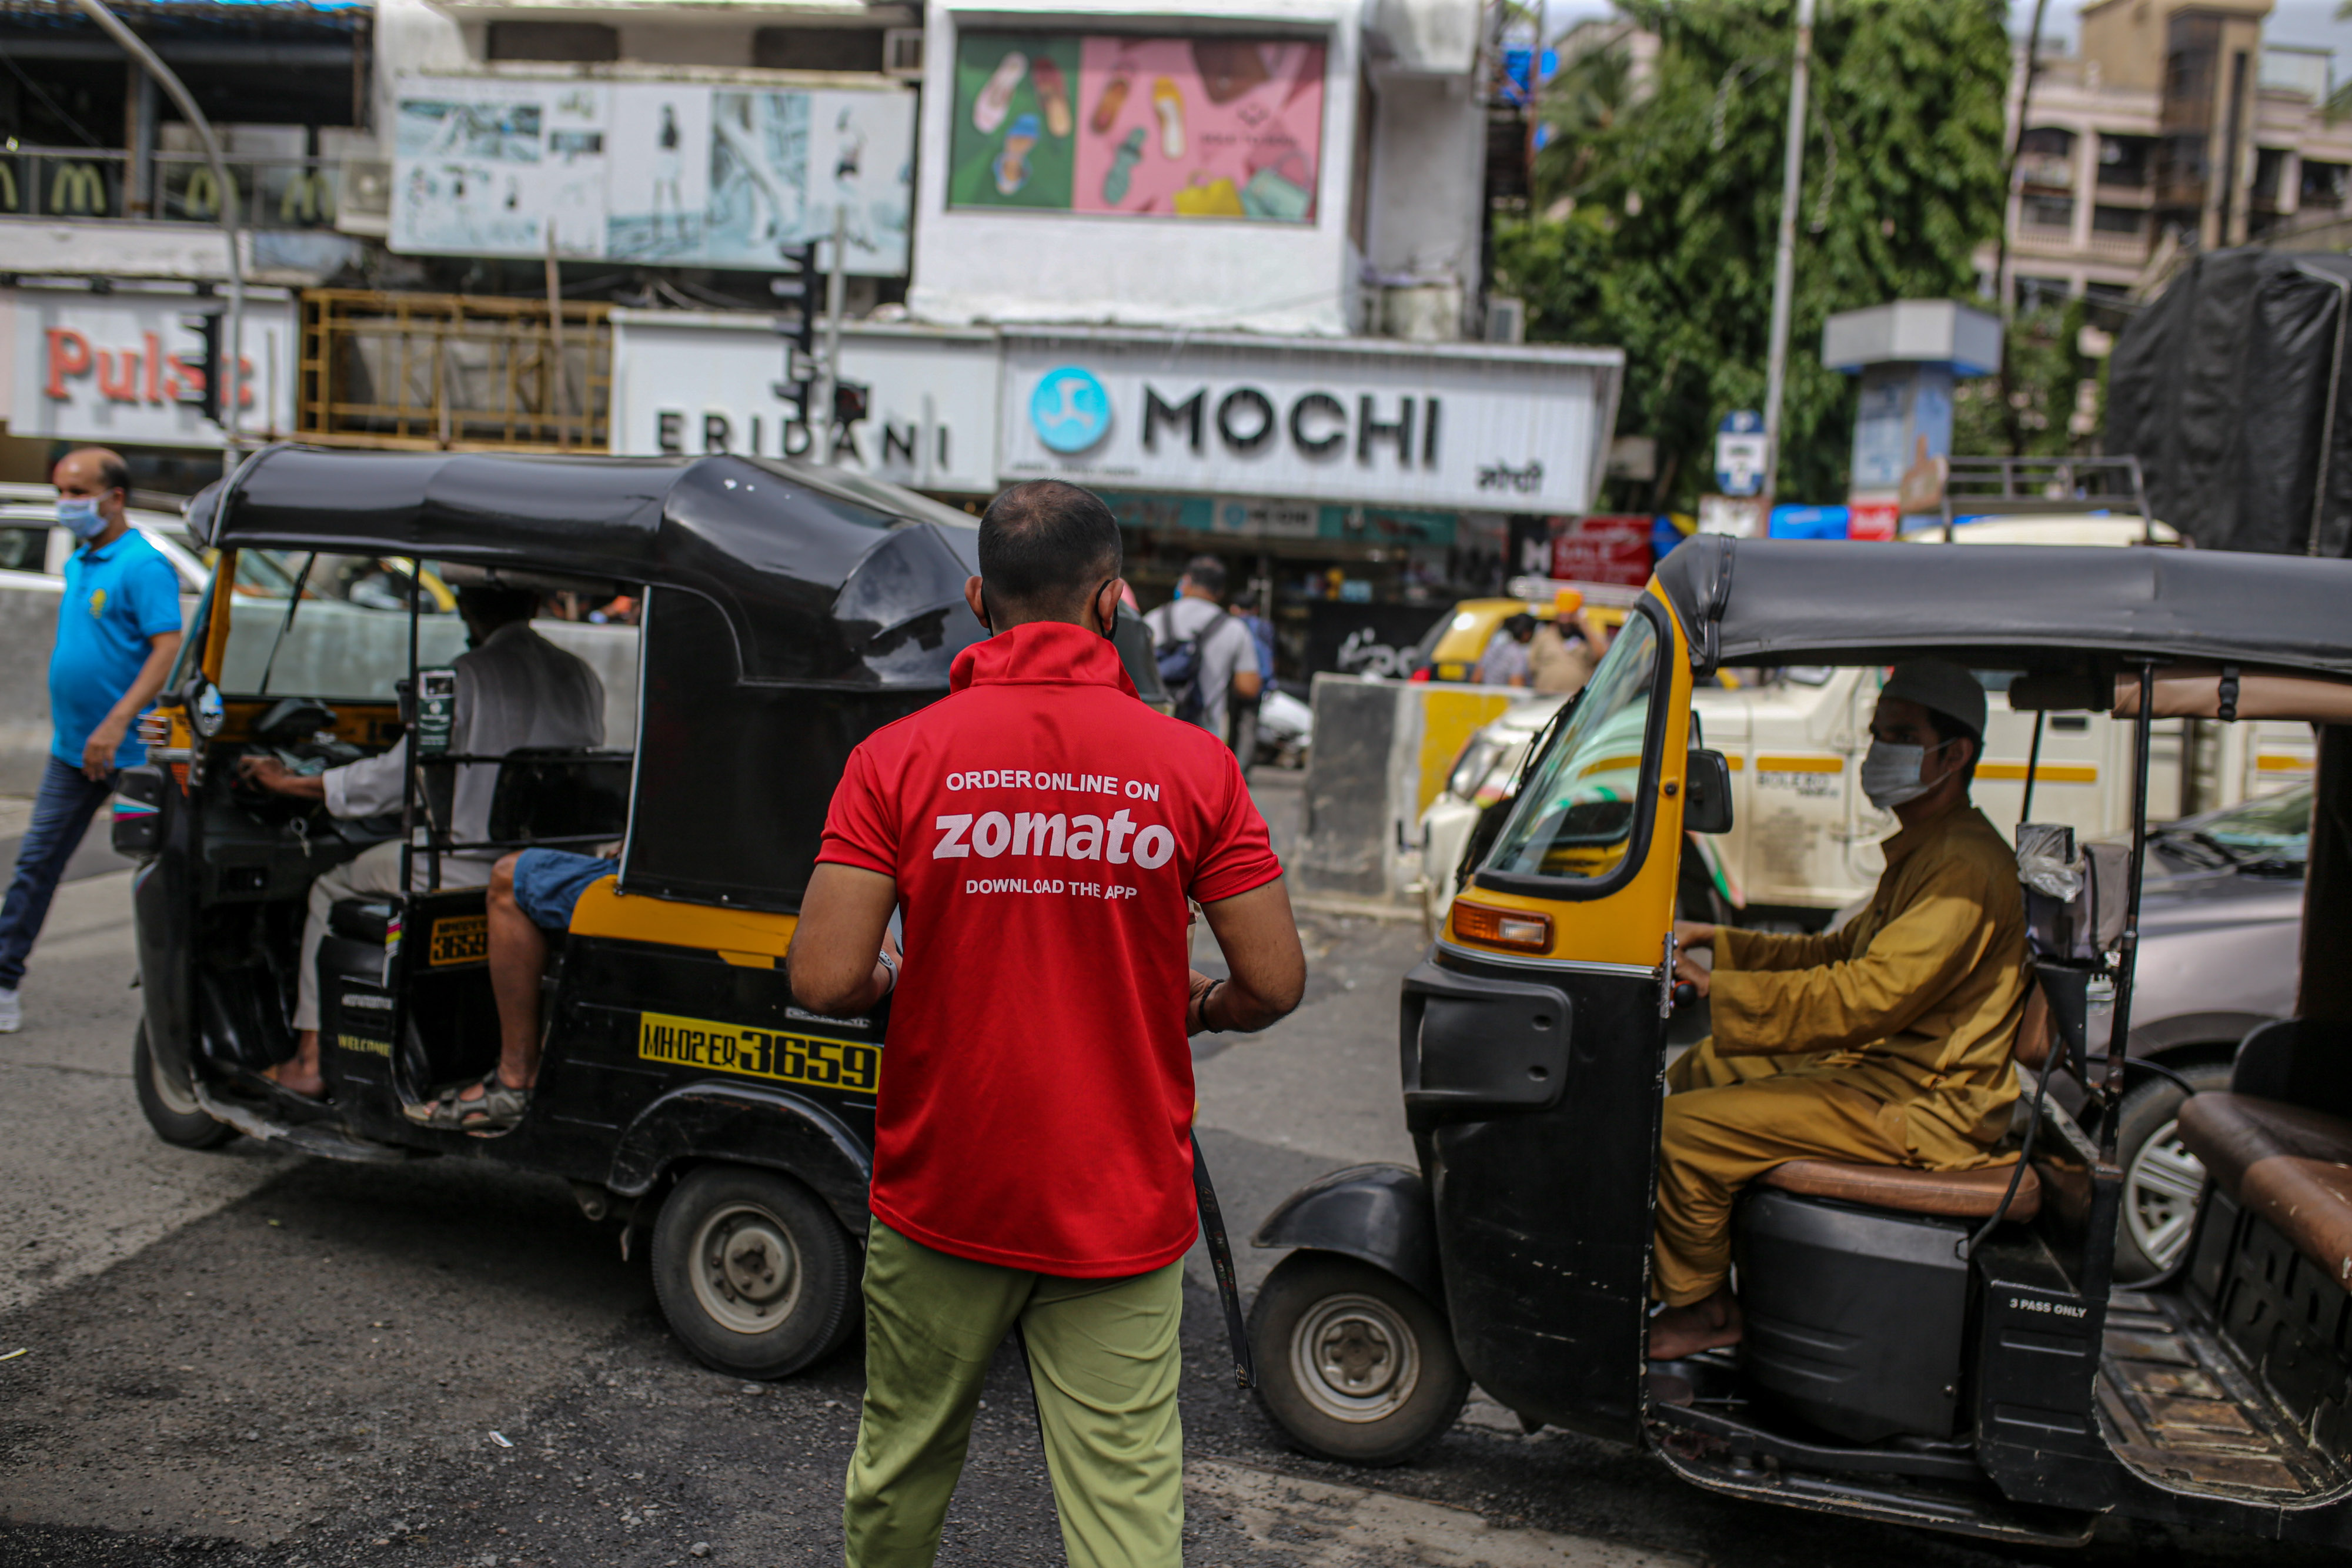 Zomato’s $1.3 billion initial public offering was fully subscribed on the first day of sale.